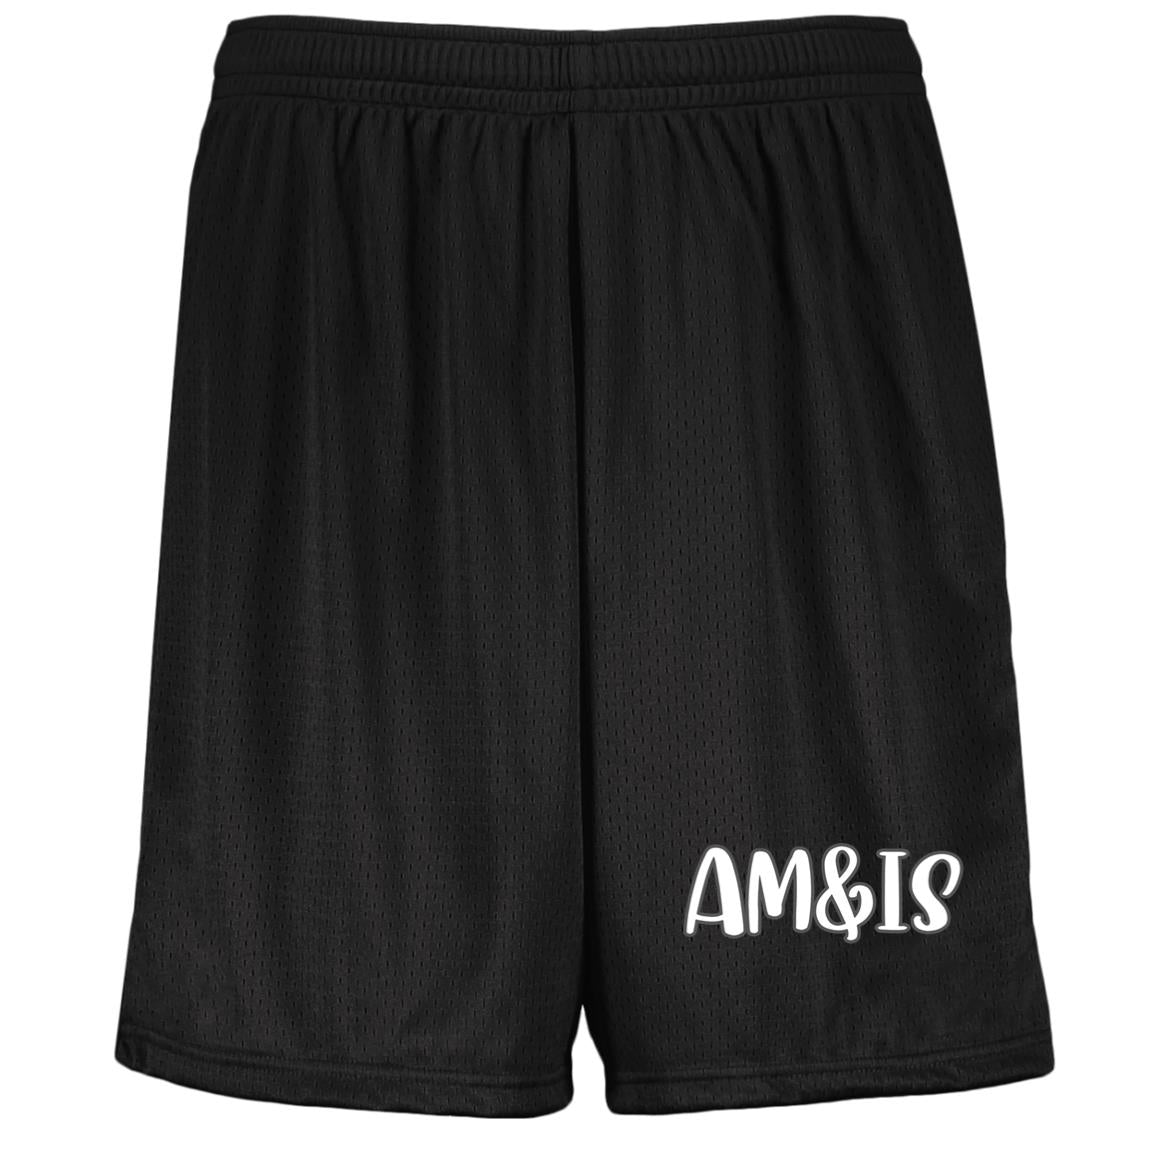 BLACK AM&IS Youth Moisture-Wicking Mesh Shorts - kid's shorts at TFC&H Co.